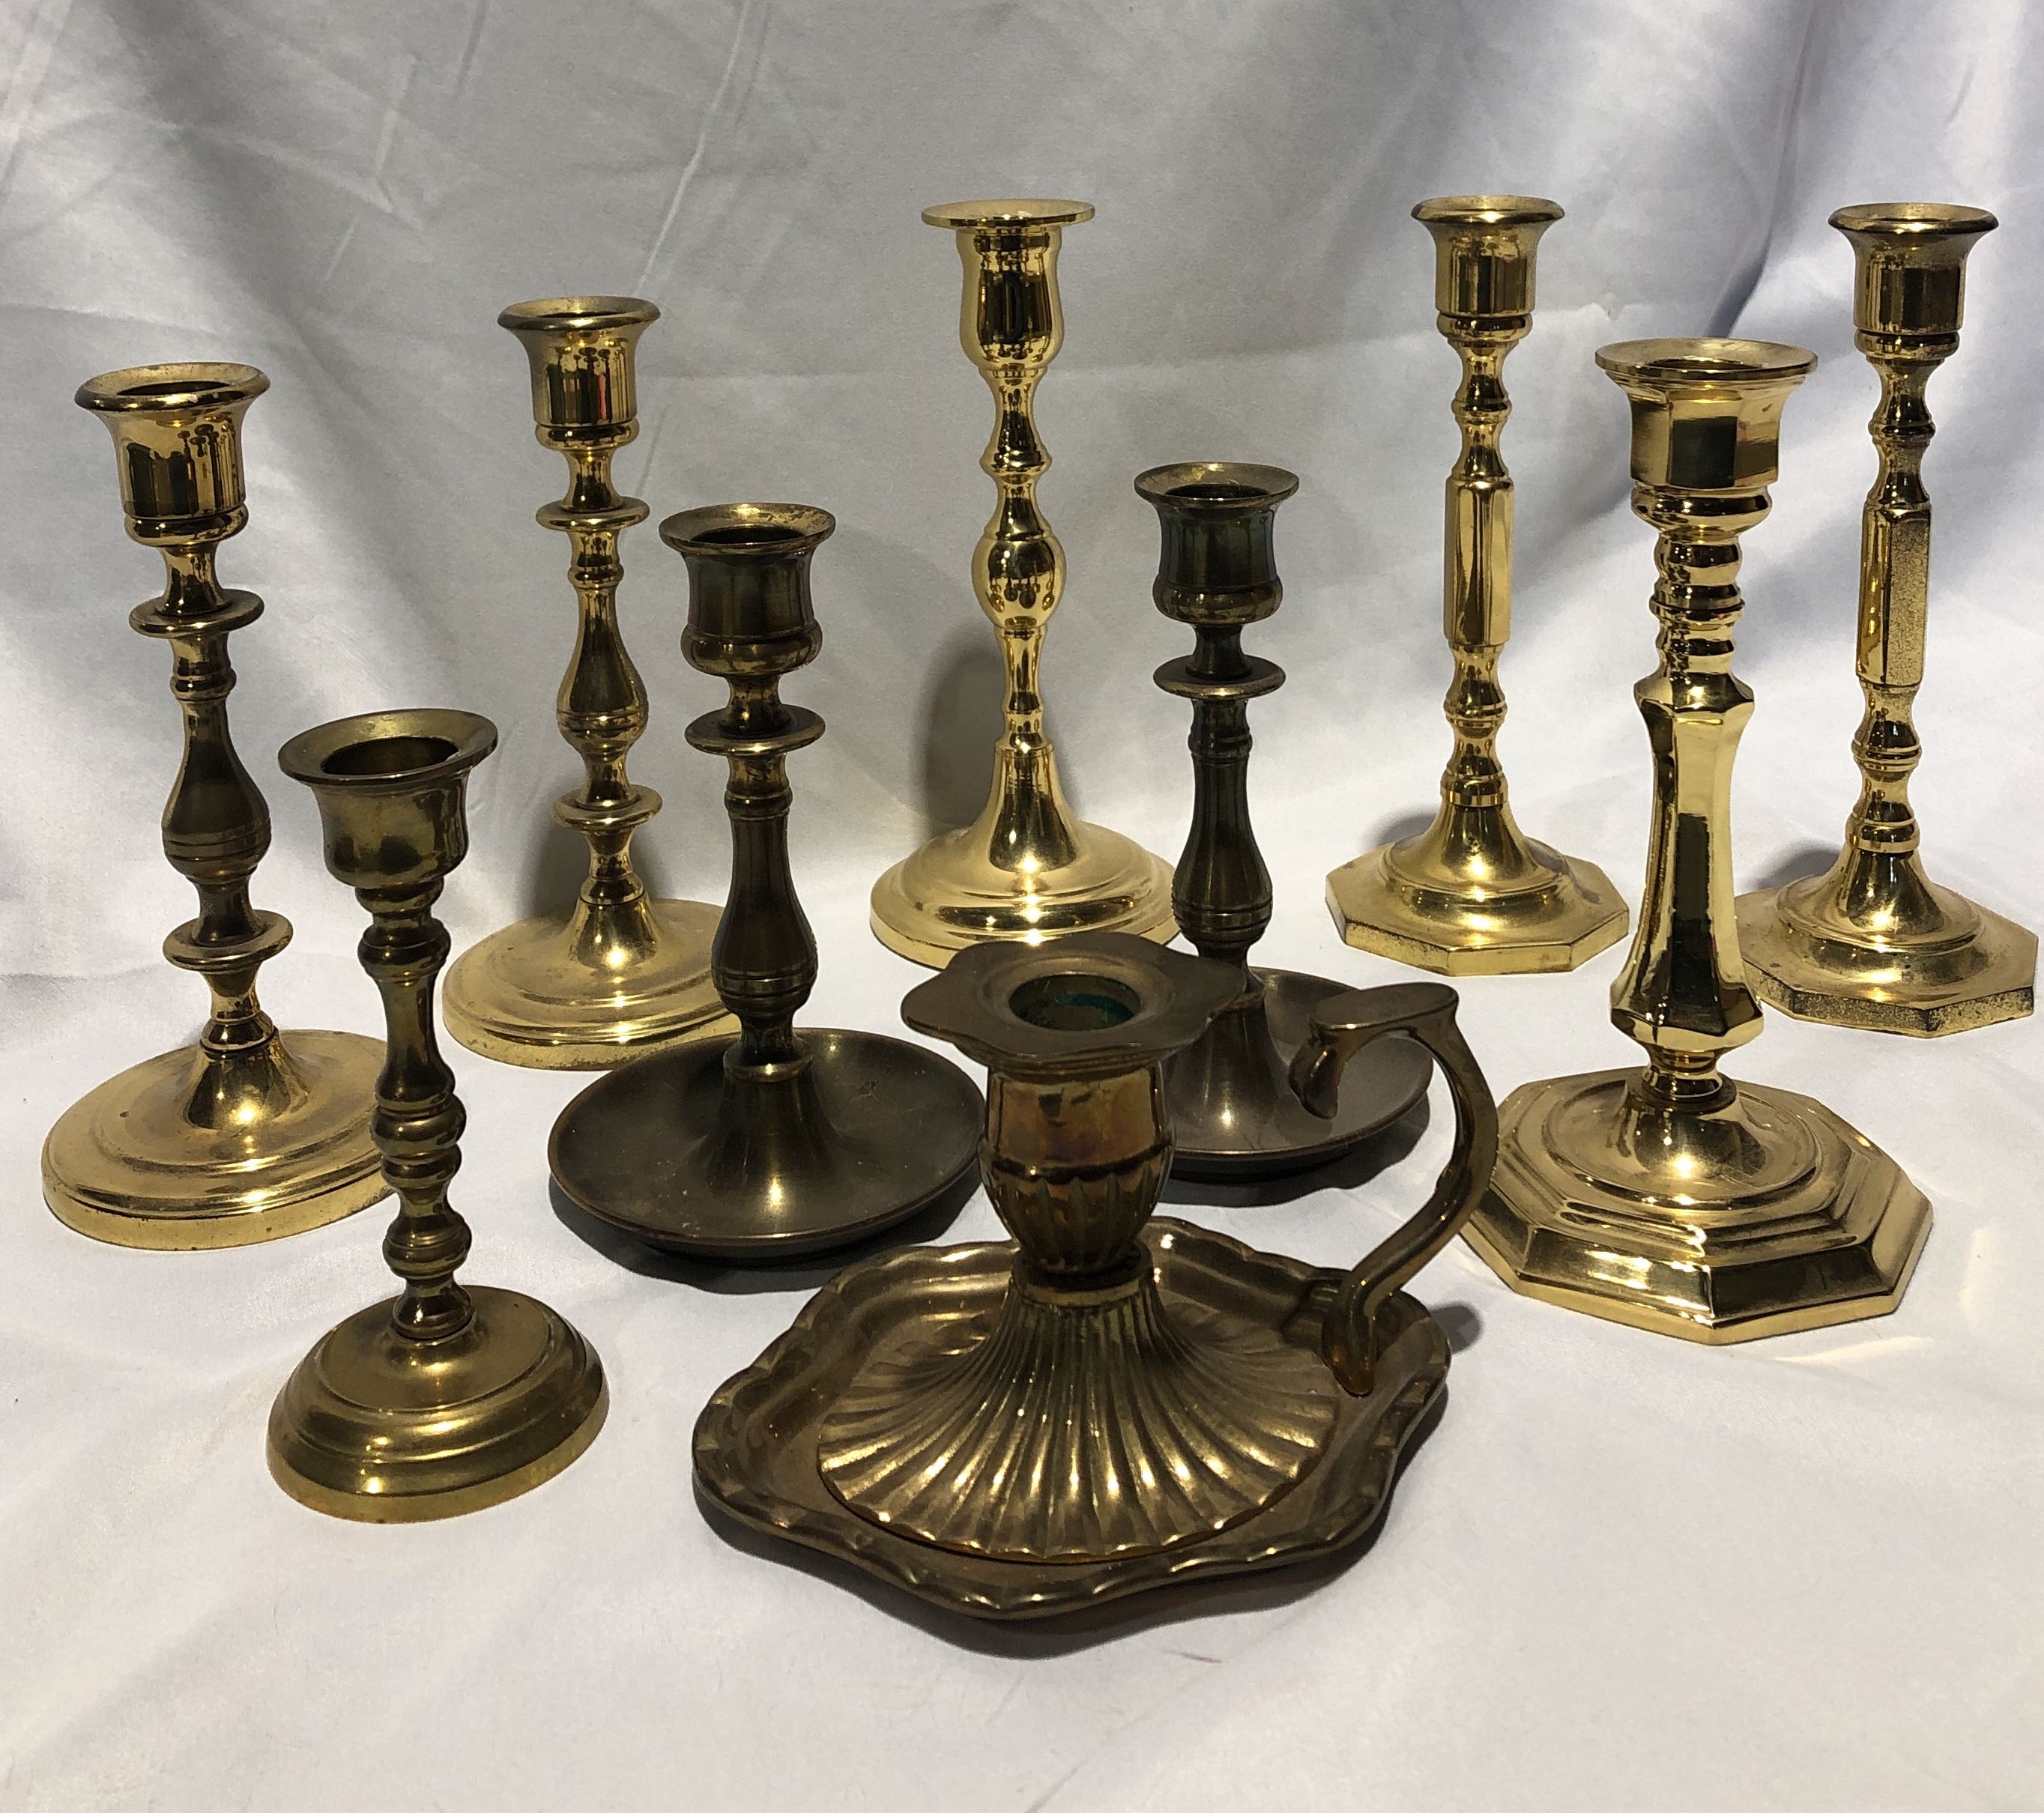 Classy-Collection-Of-Vintage-Brass-Candlestick-Holders